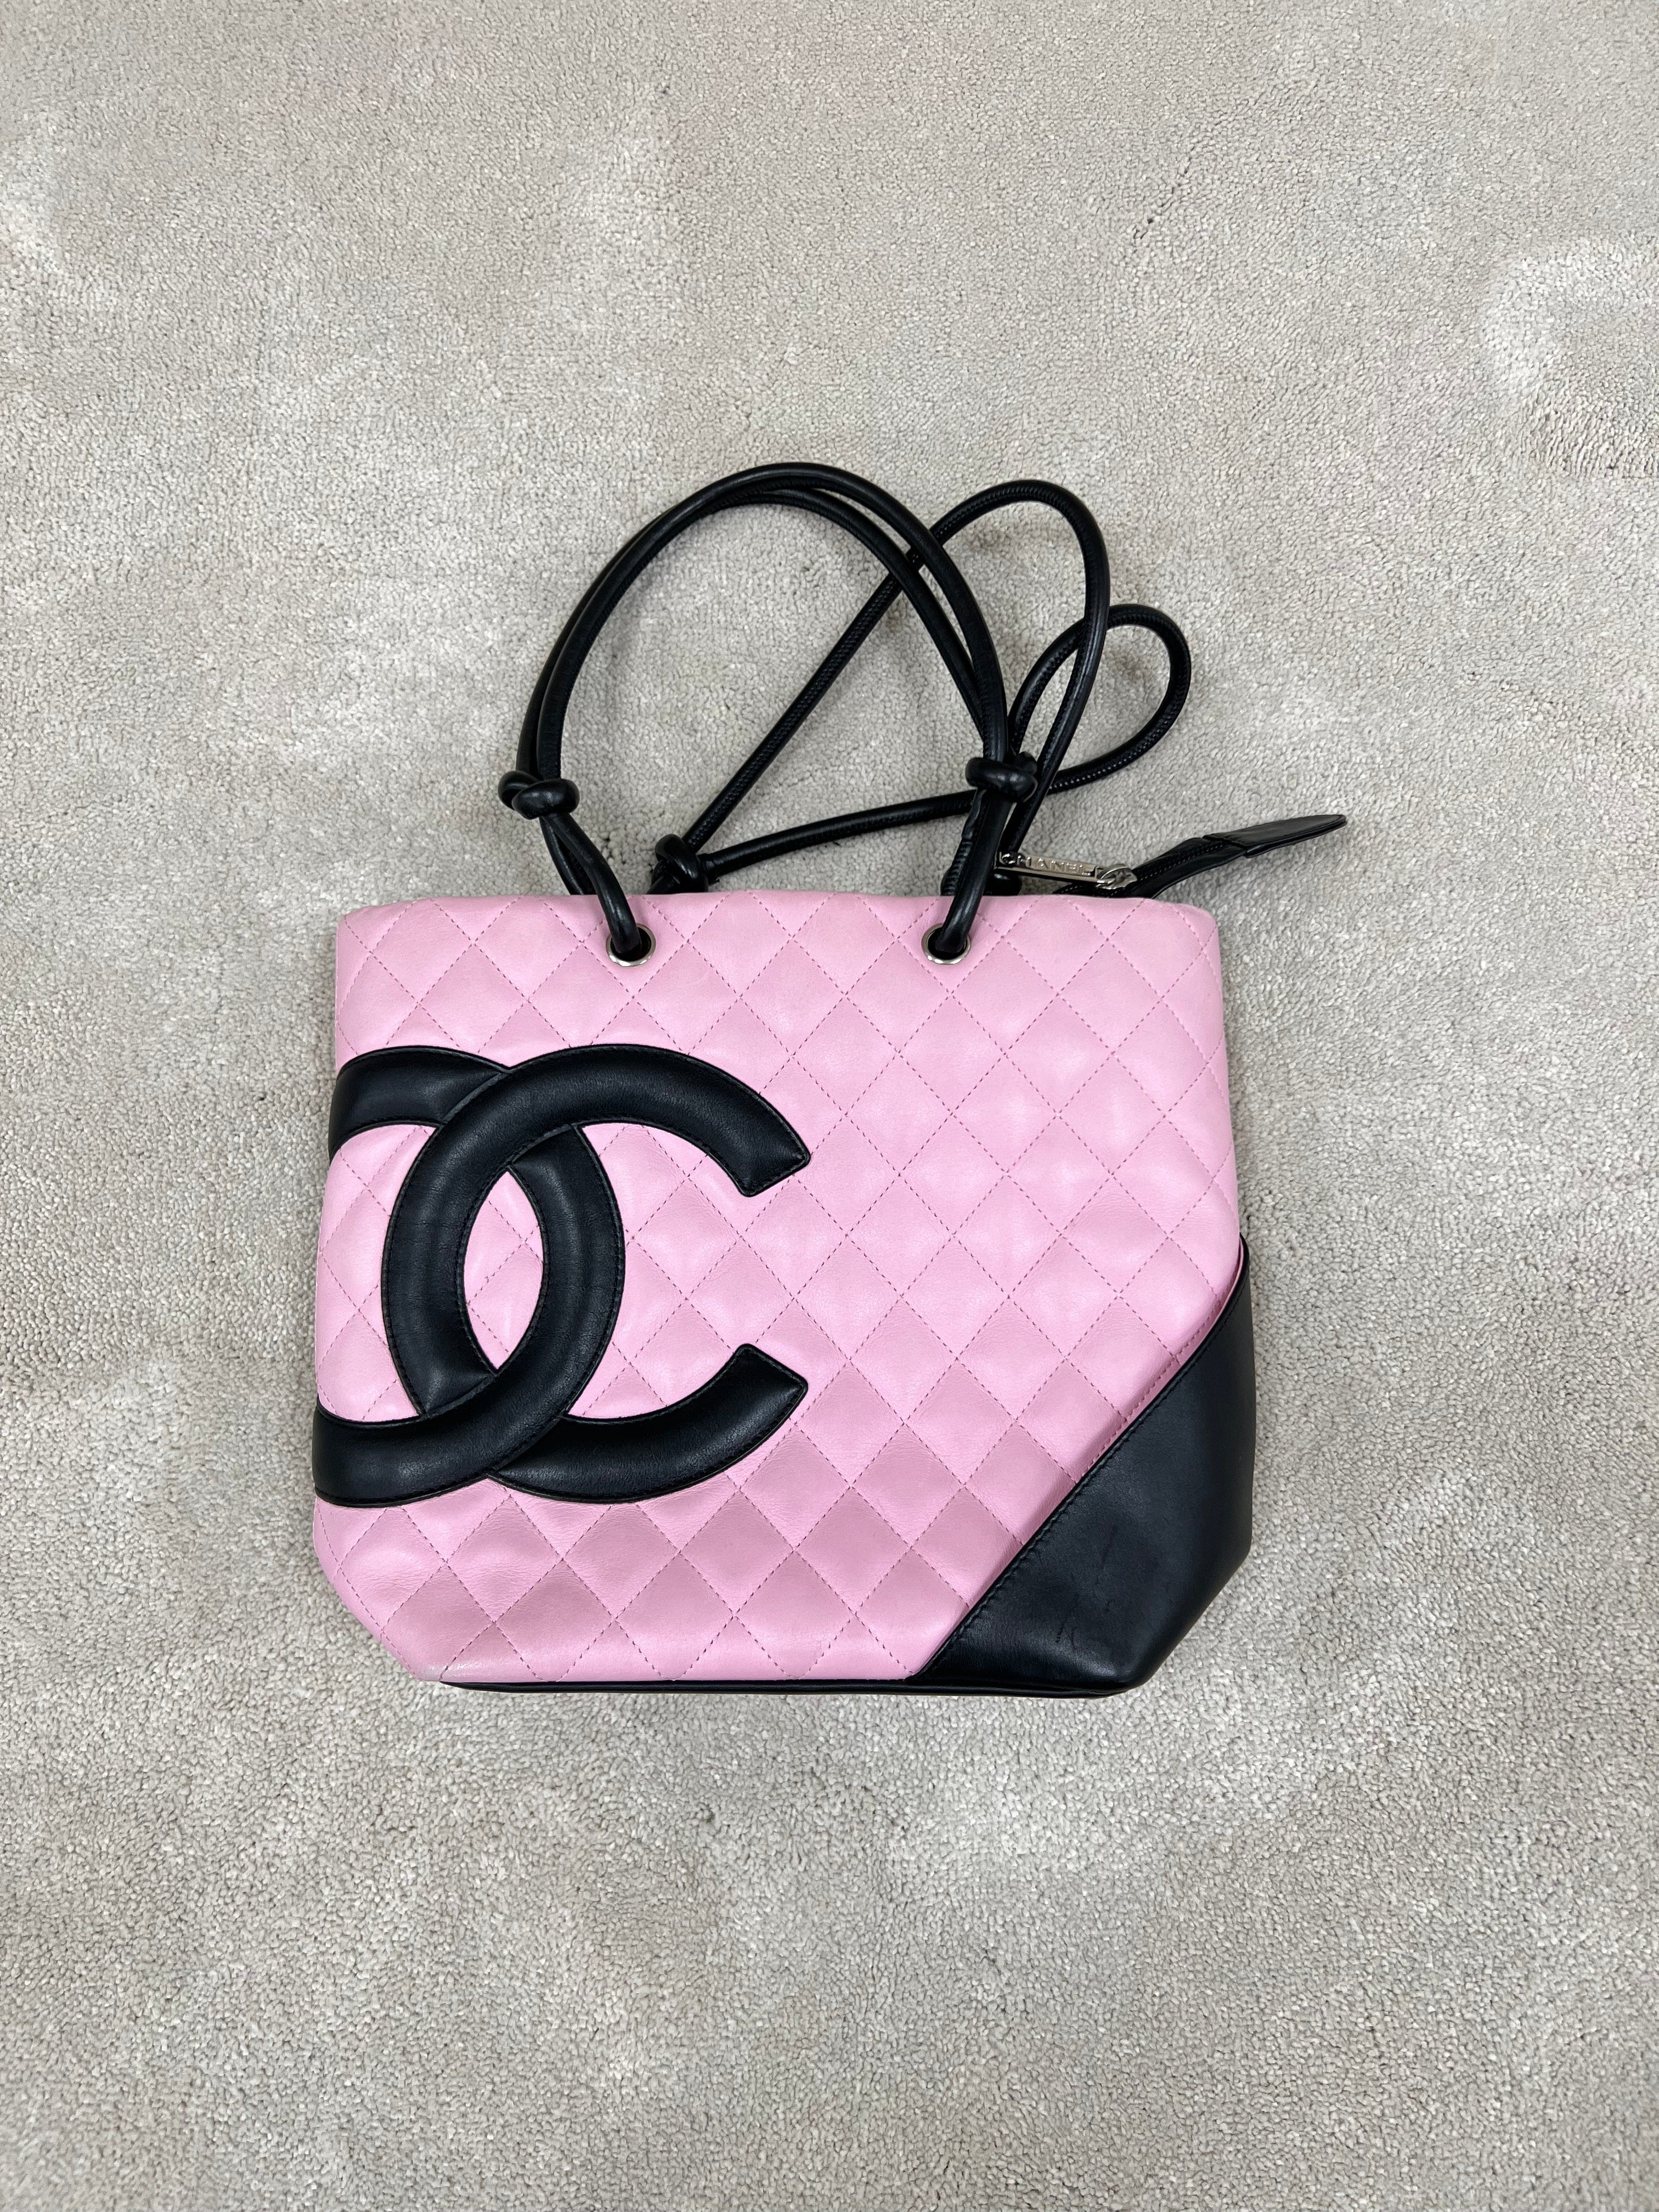 chanel large cambon tote